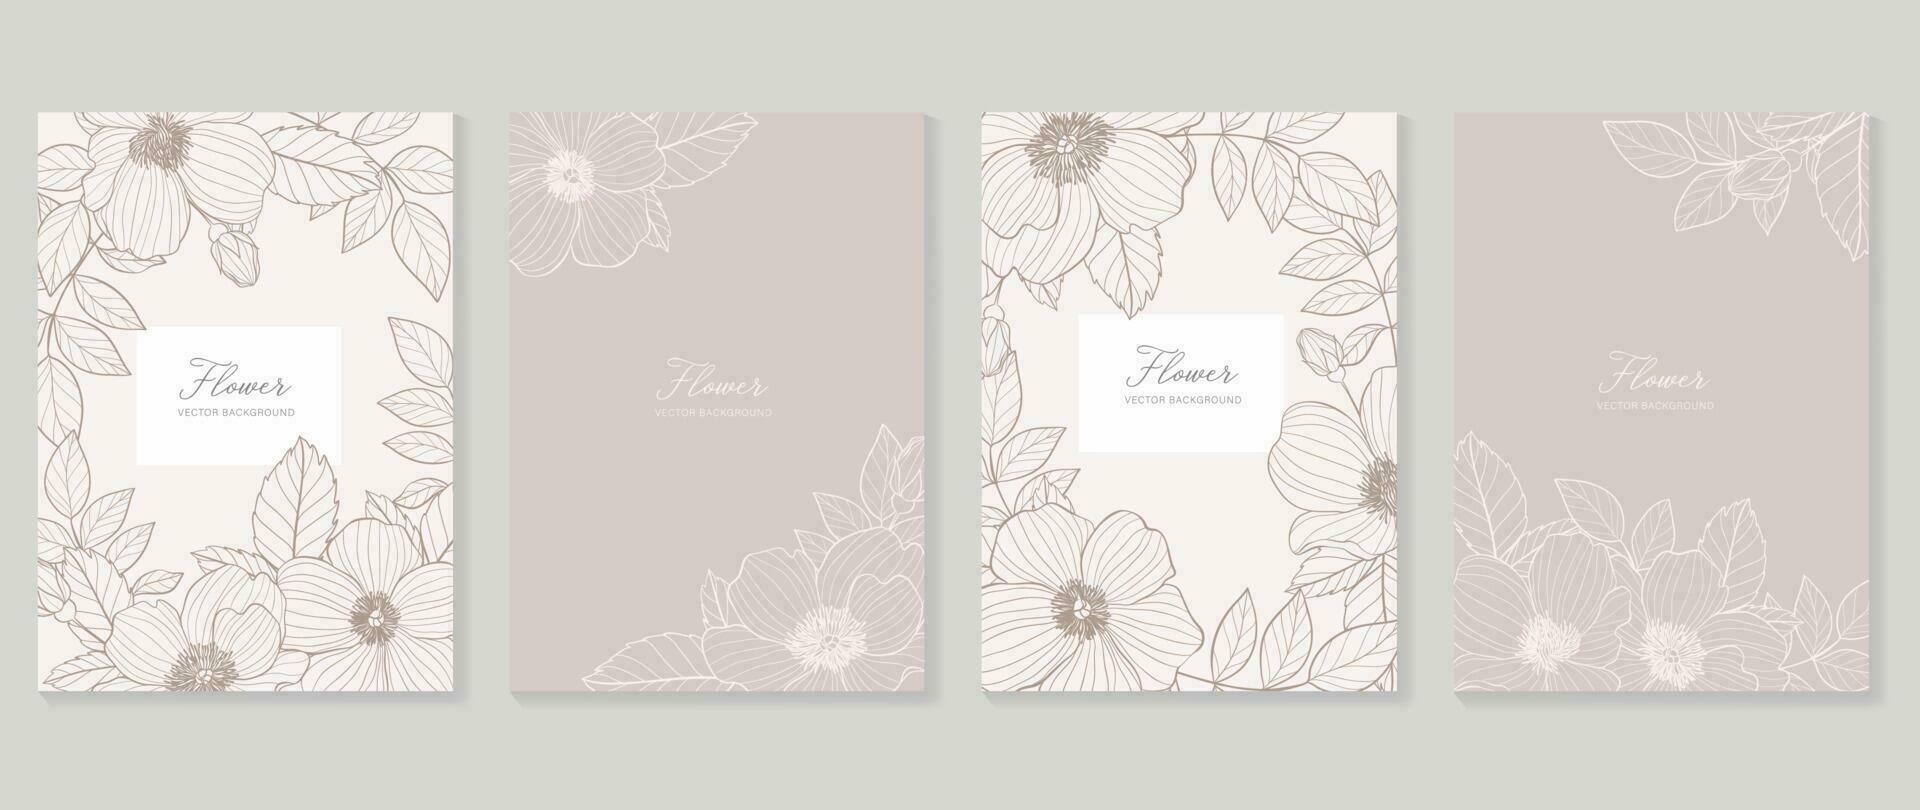 Minimal floral vector background cover. Plant hand drawn with copy space for text and line art flower and leaf branch in pastel colors. Botanical design suitable for banner, cover, invitation.